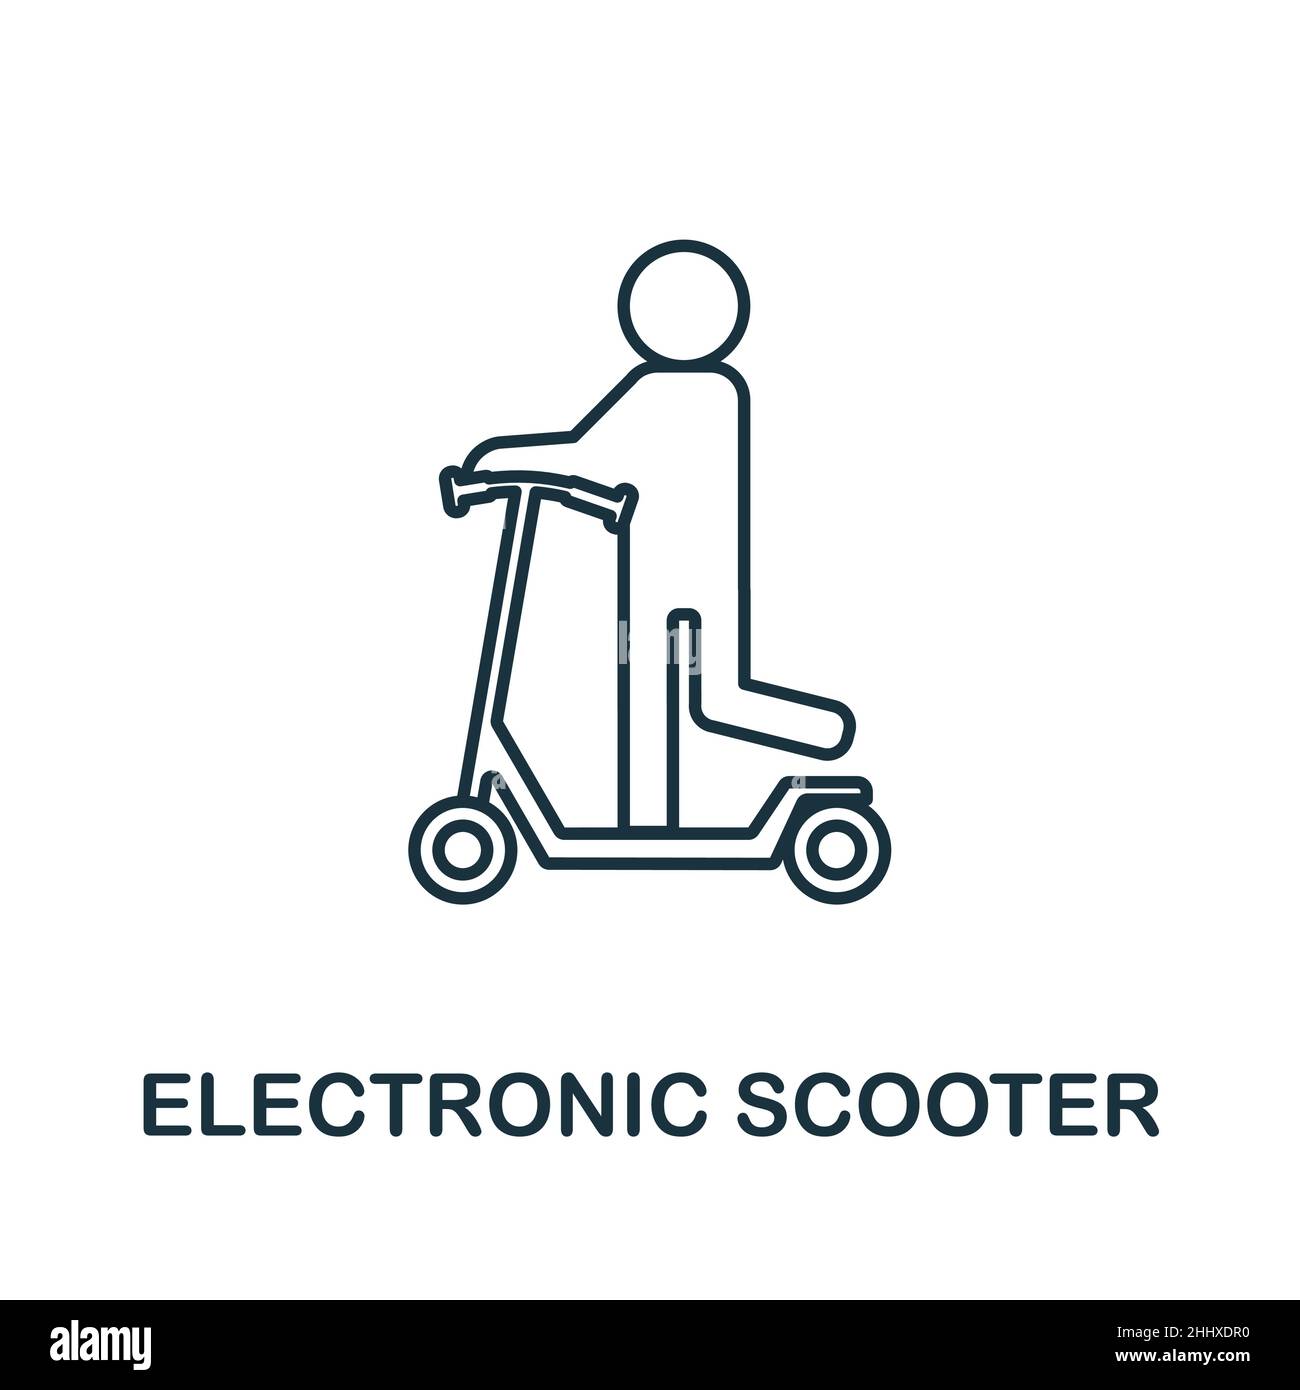 Electronic Scooter icon. Line element from big city life collection. Linear Electronic Scooter icon sign for web design, infographics and more. Stock Vector